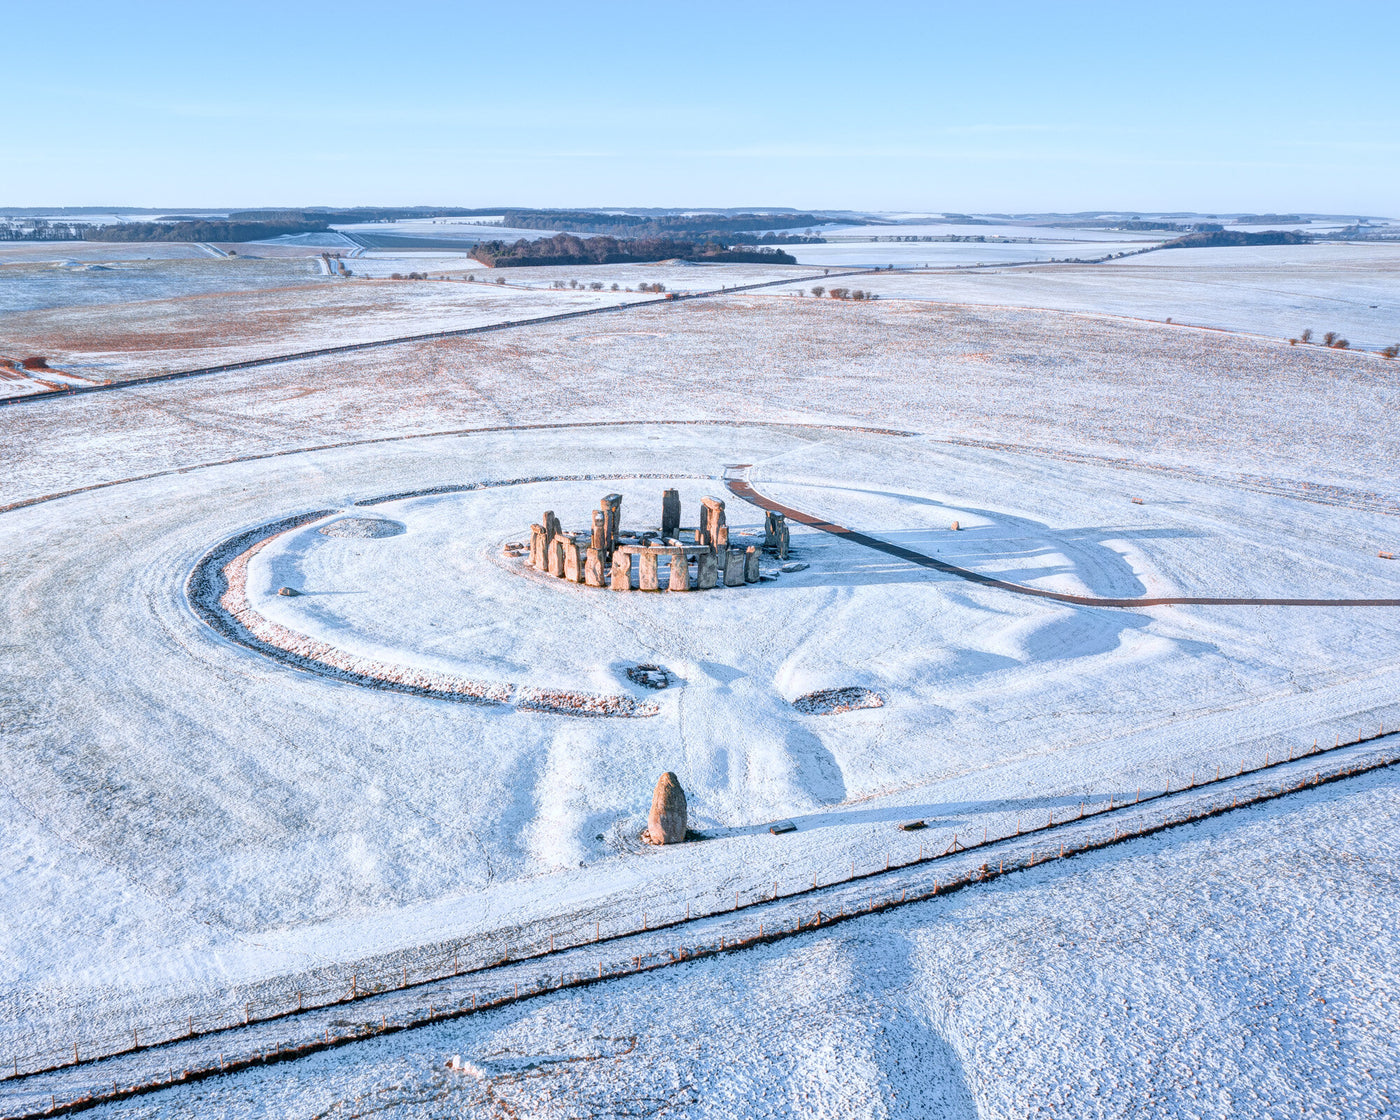 - Stonehenge in Winter | All Images by David R Abram